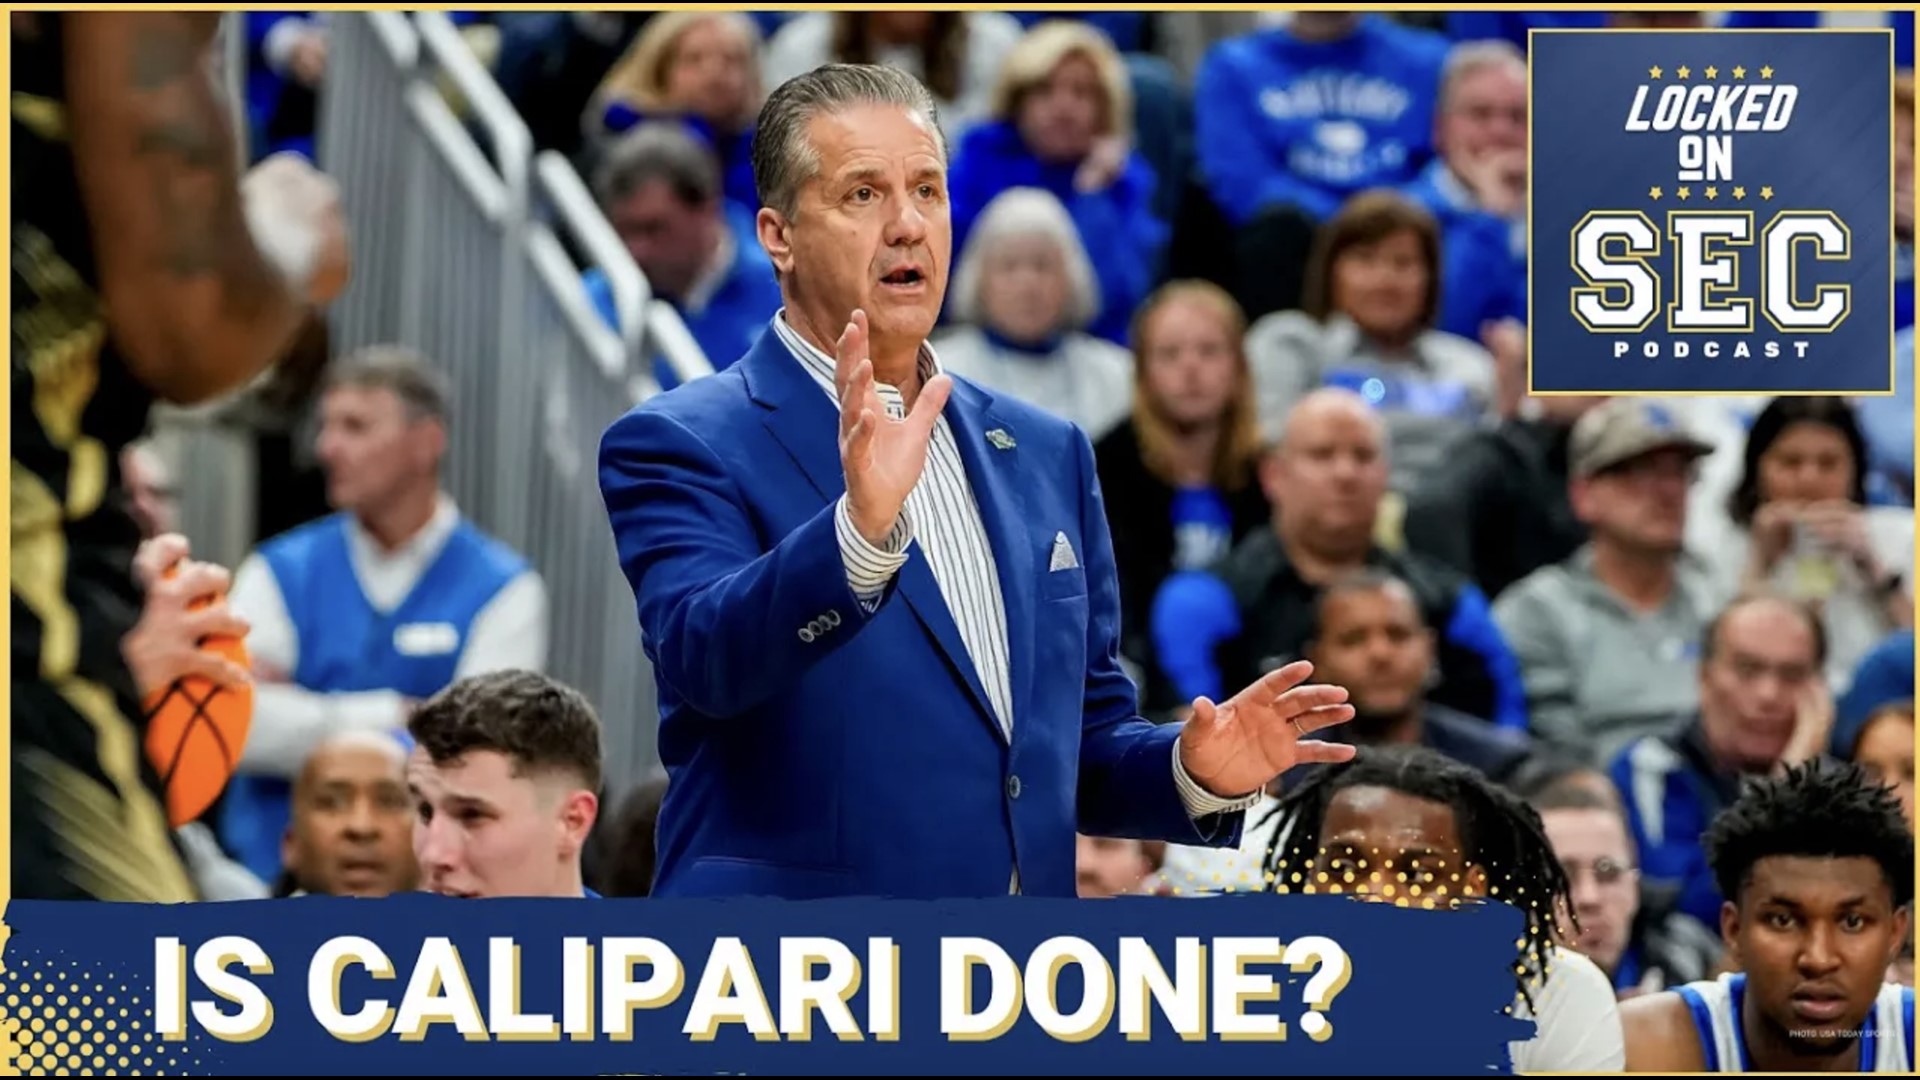 On today's show, we react to Kentucky basketball losing in the first round to Oakland, and ask if John Calipari just coached his last game at UK.